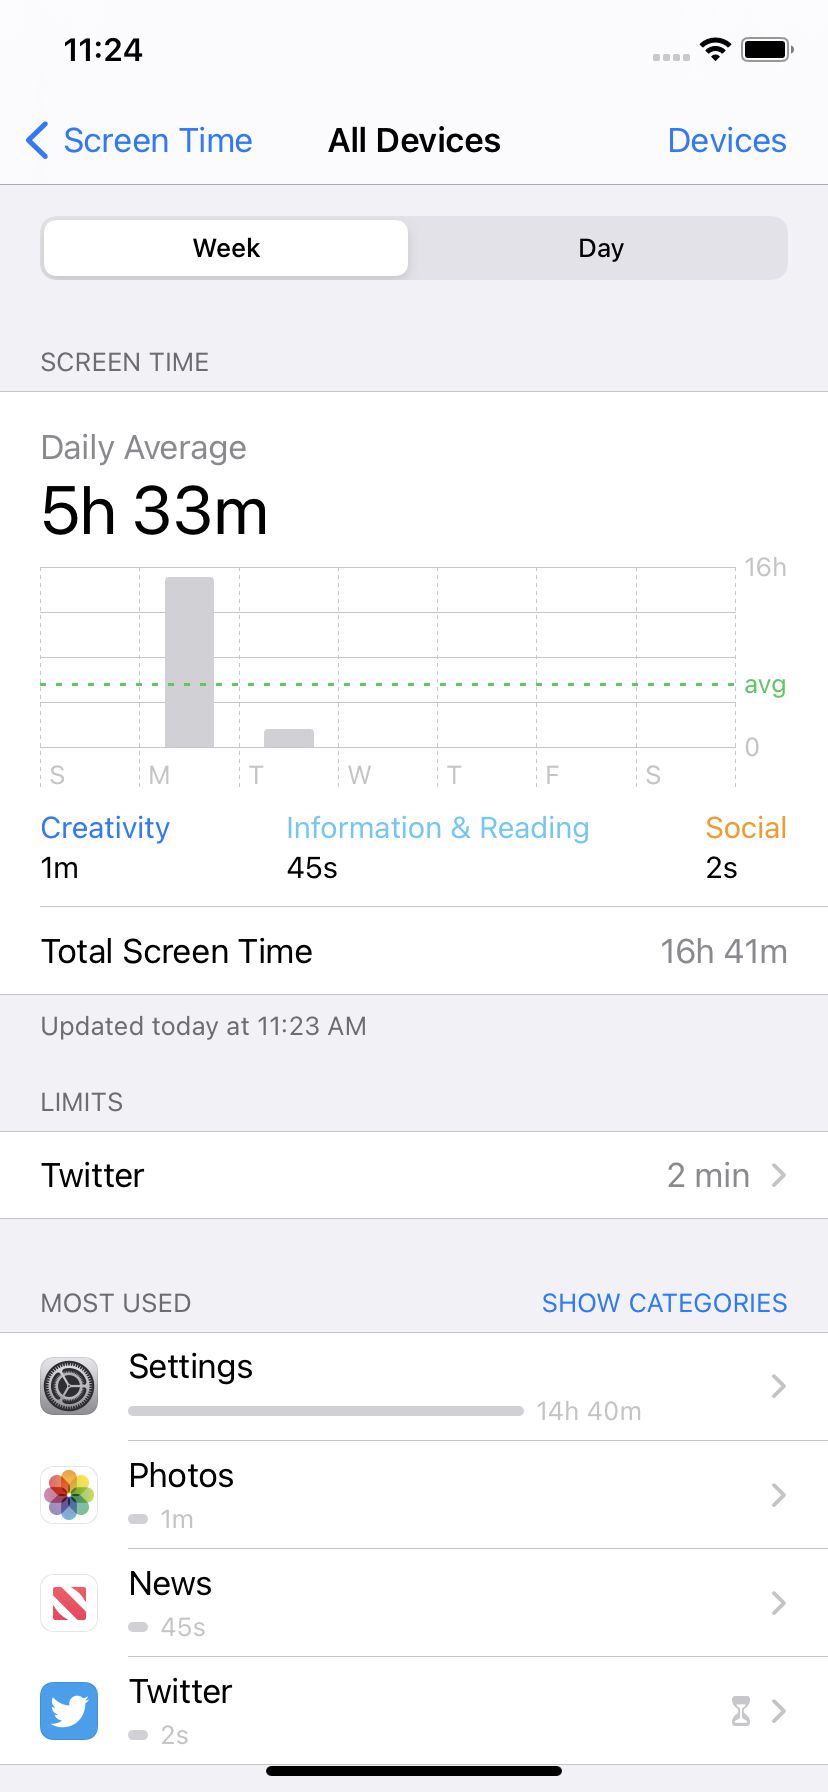 Screen Time lets you know how long you’ve been on your phone, and with which apps